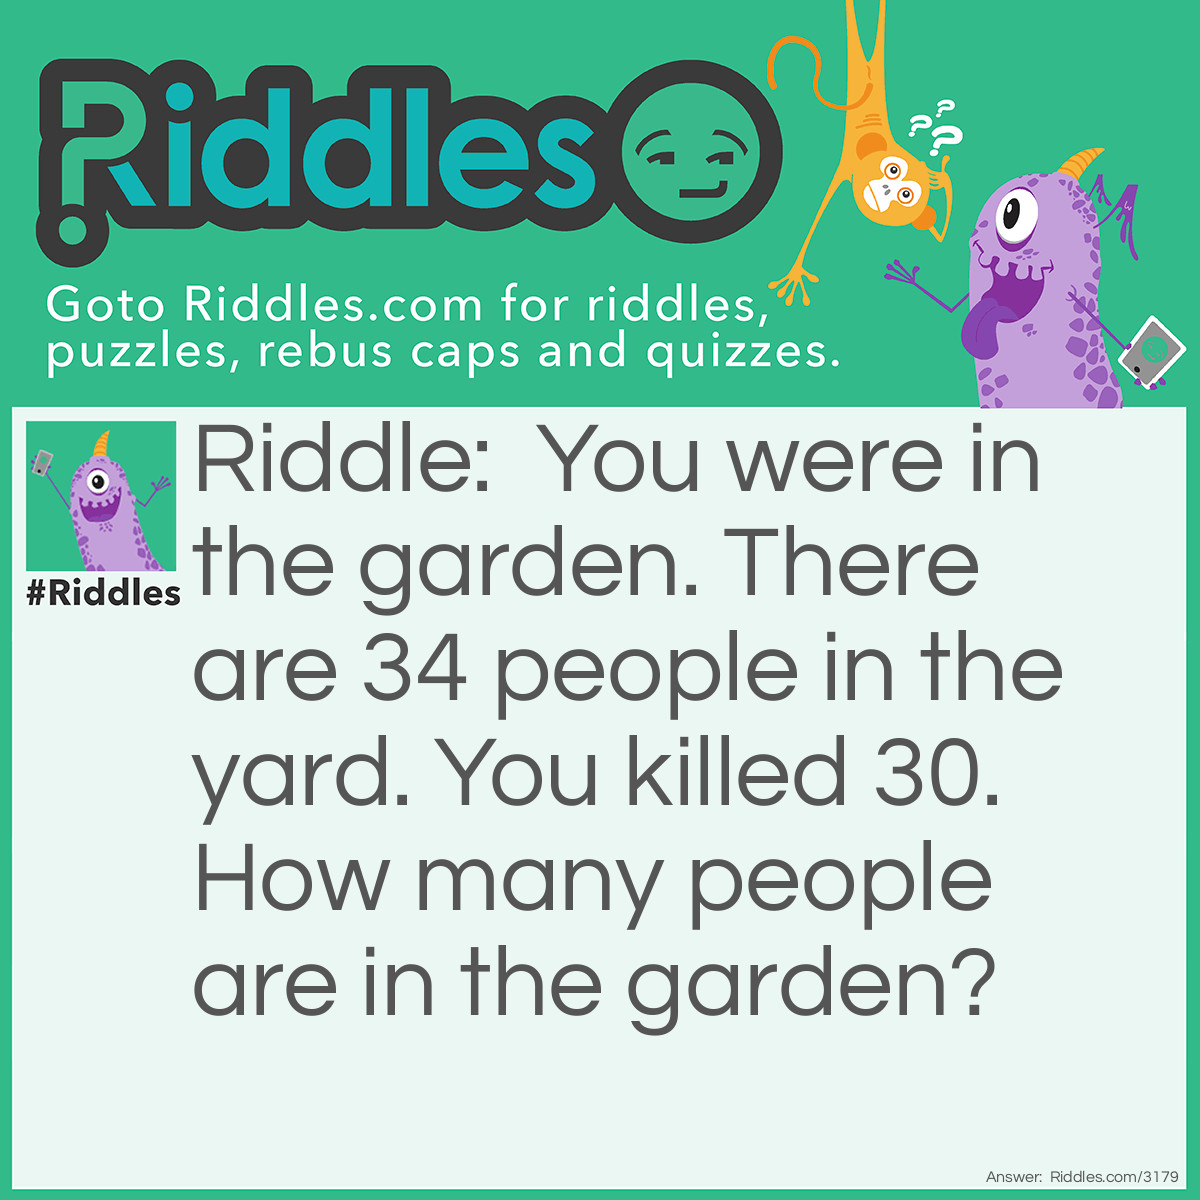 Riddle: You were in the garden. There are 34 people in the yard. You killed 30. How many people are in the garden? Answer: Only 1, the killer.  If he killed 30 the other 4 would have run away so the killer would be the only one left.